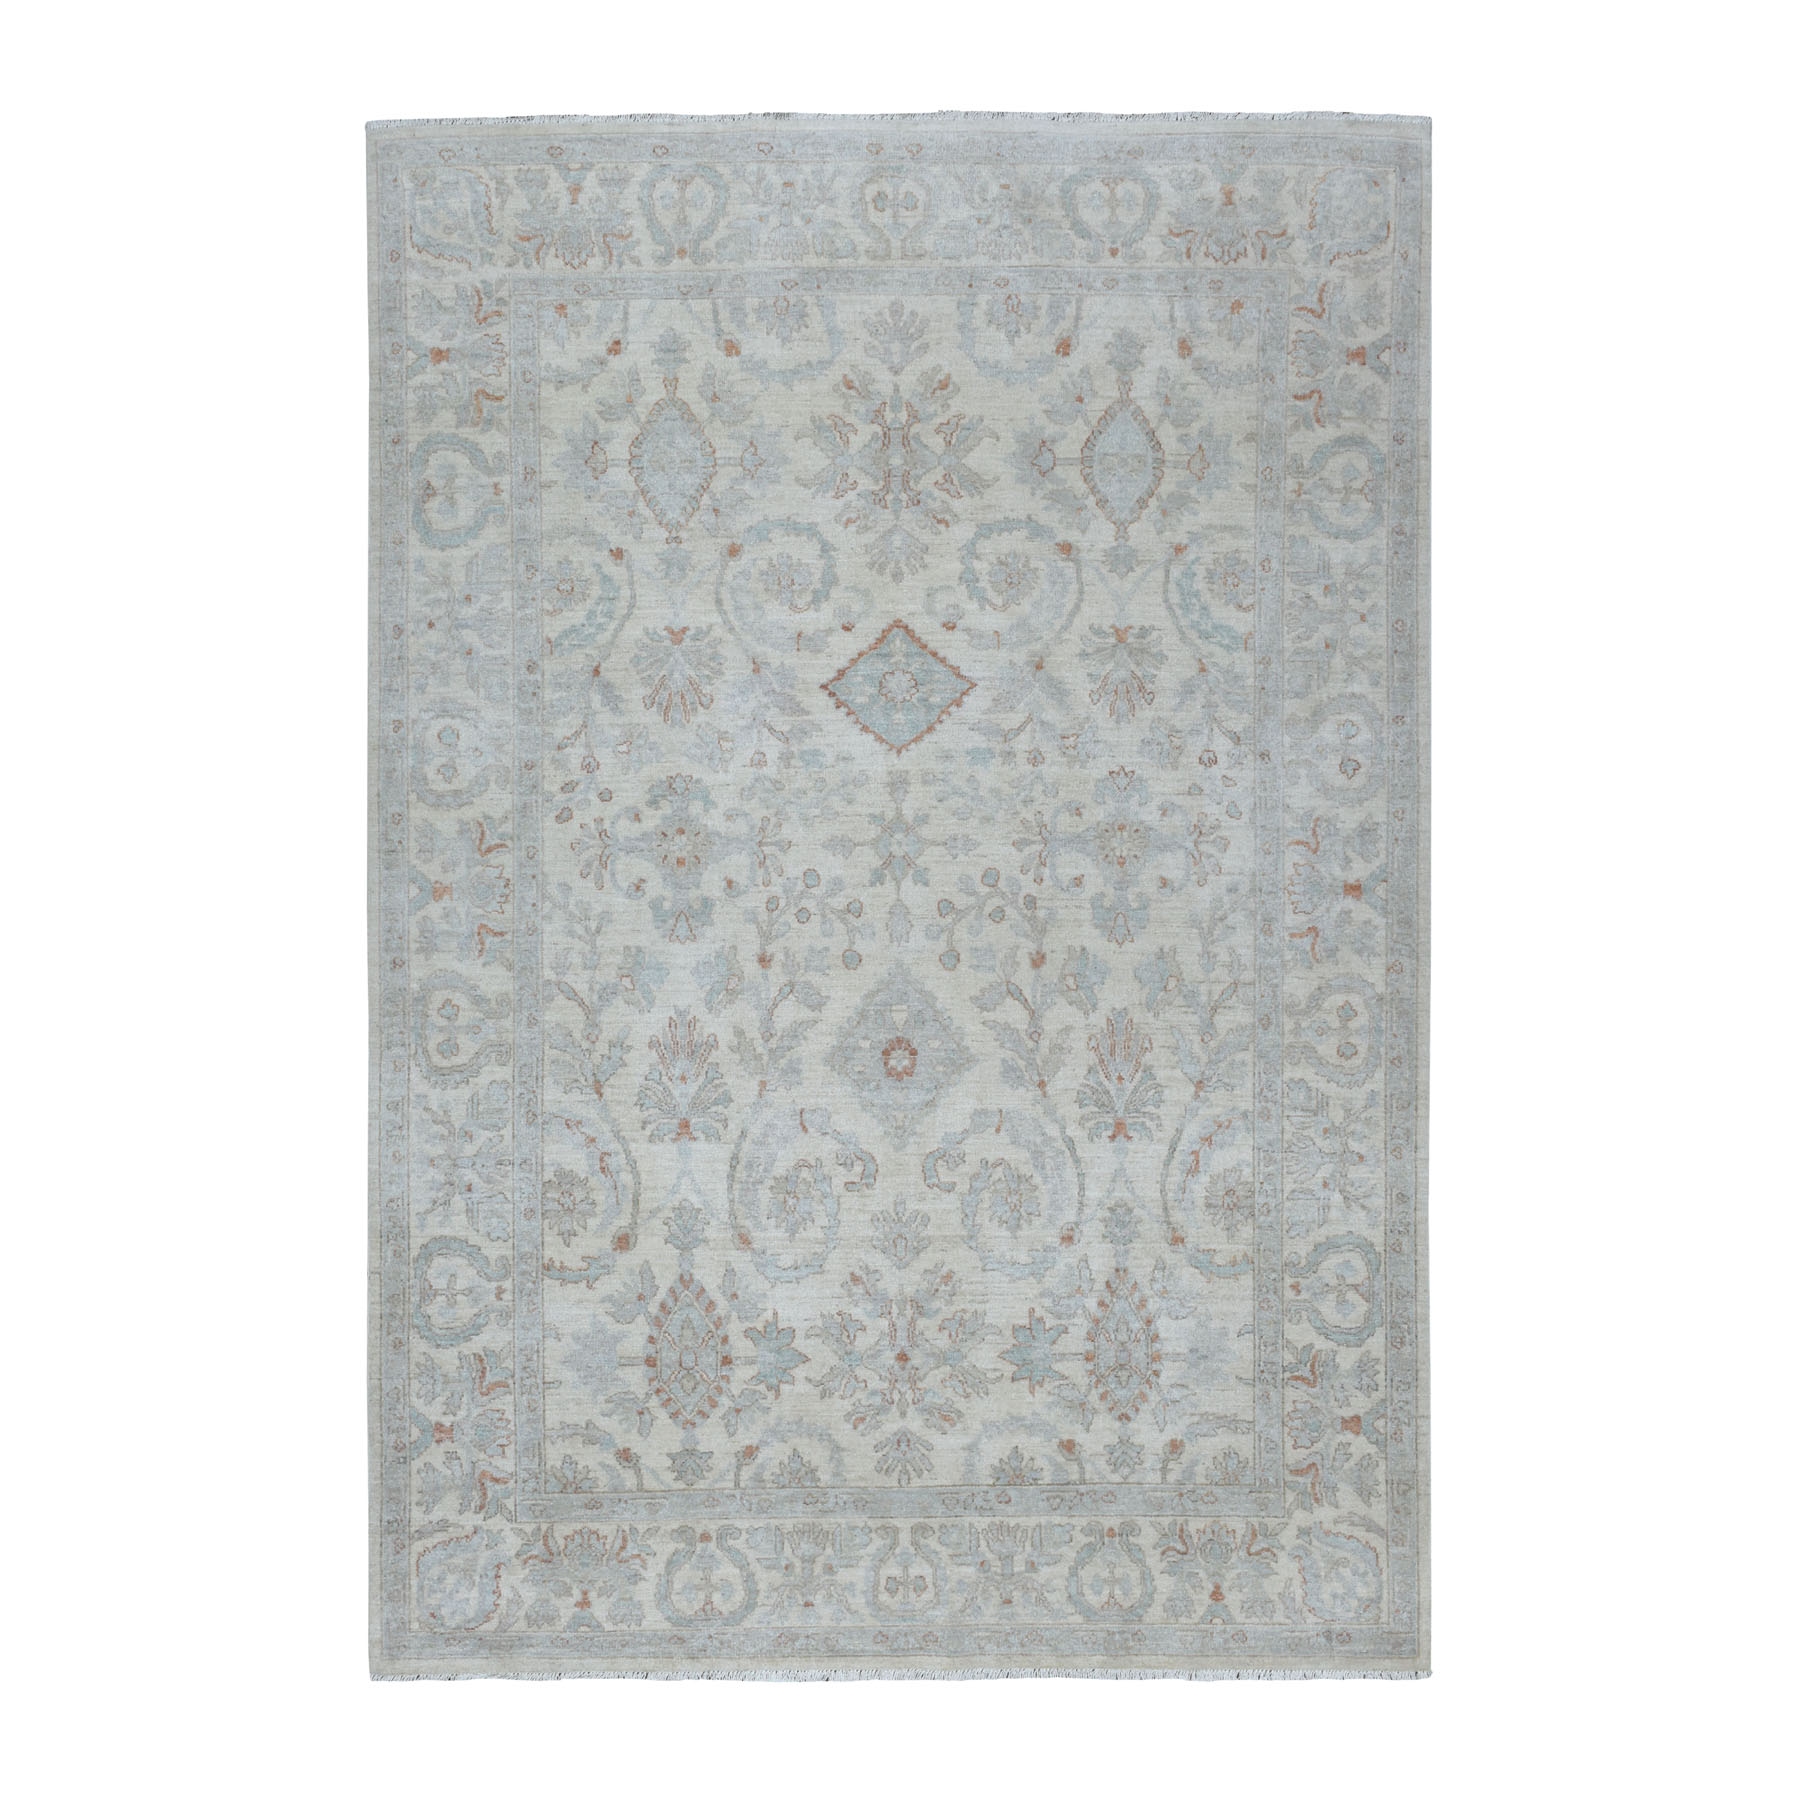 White Washable Peshawar hand-knotted Oriental Rugs - MERCHANT OF ASIA